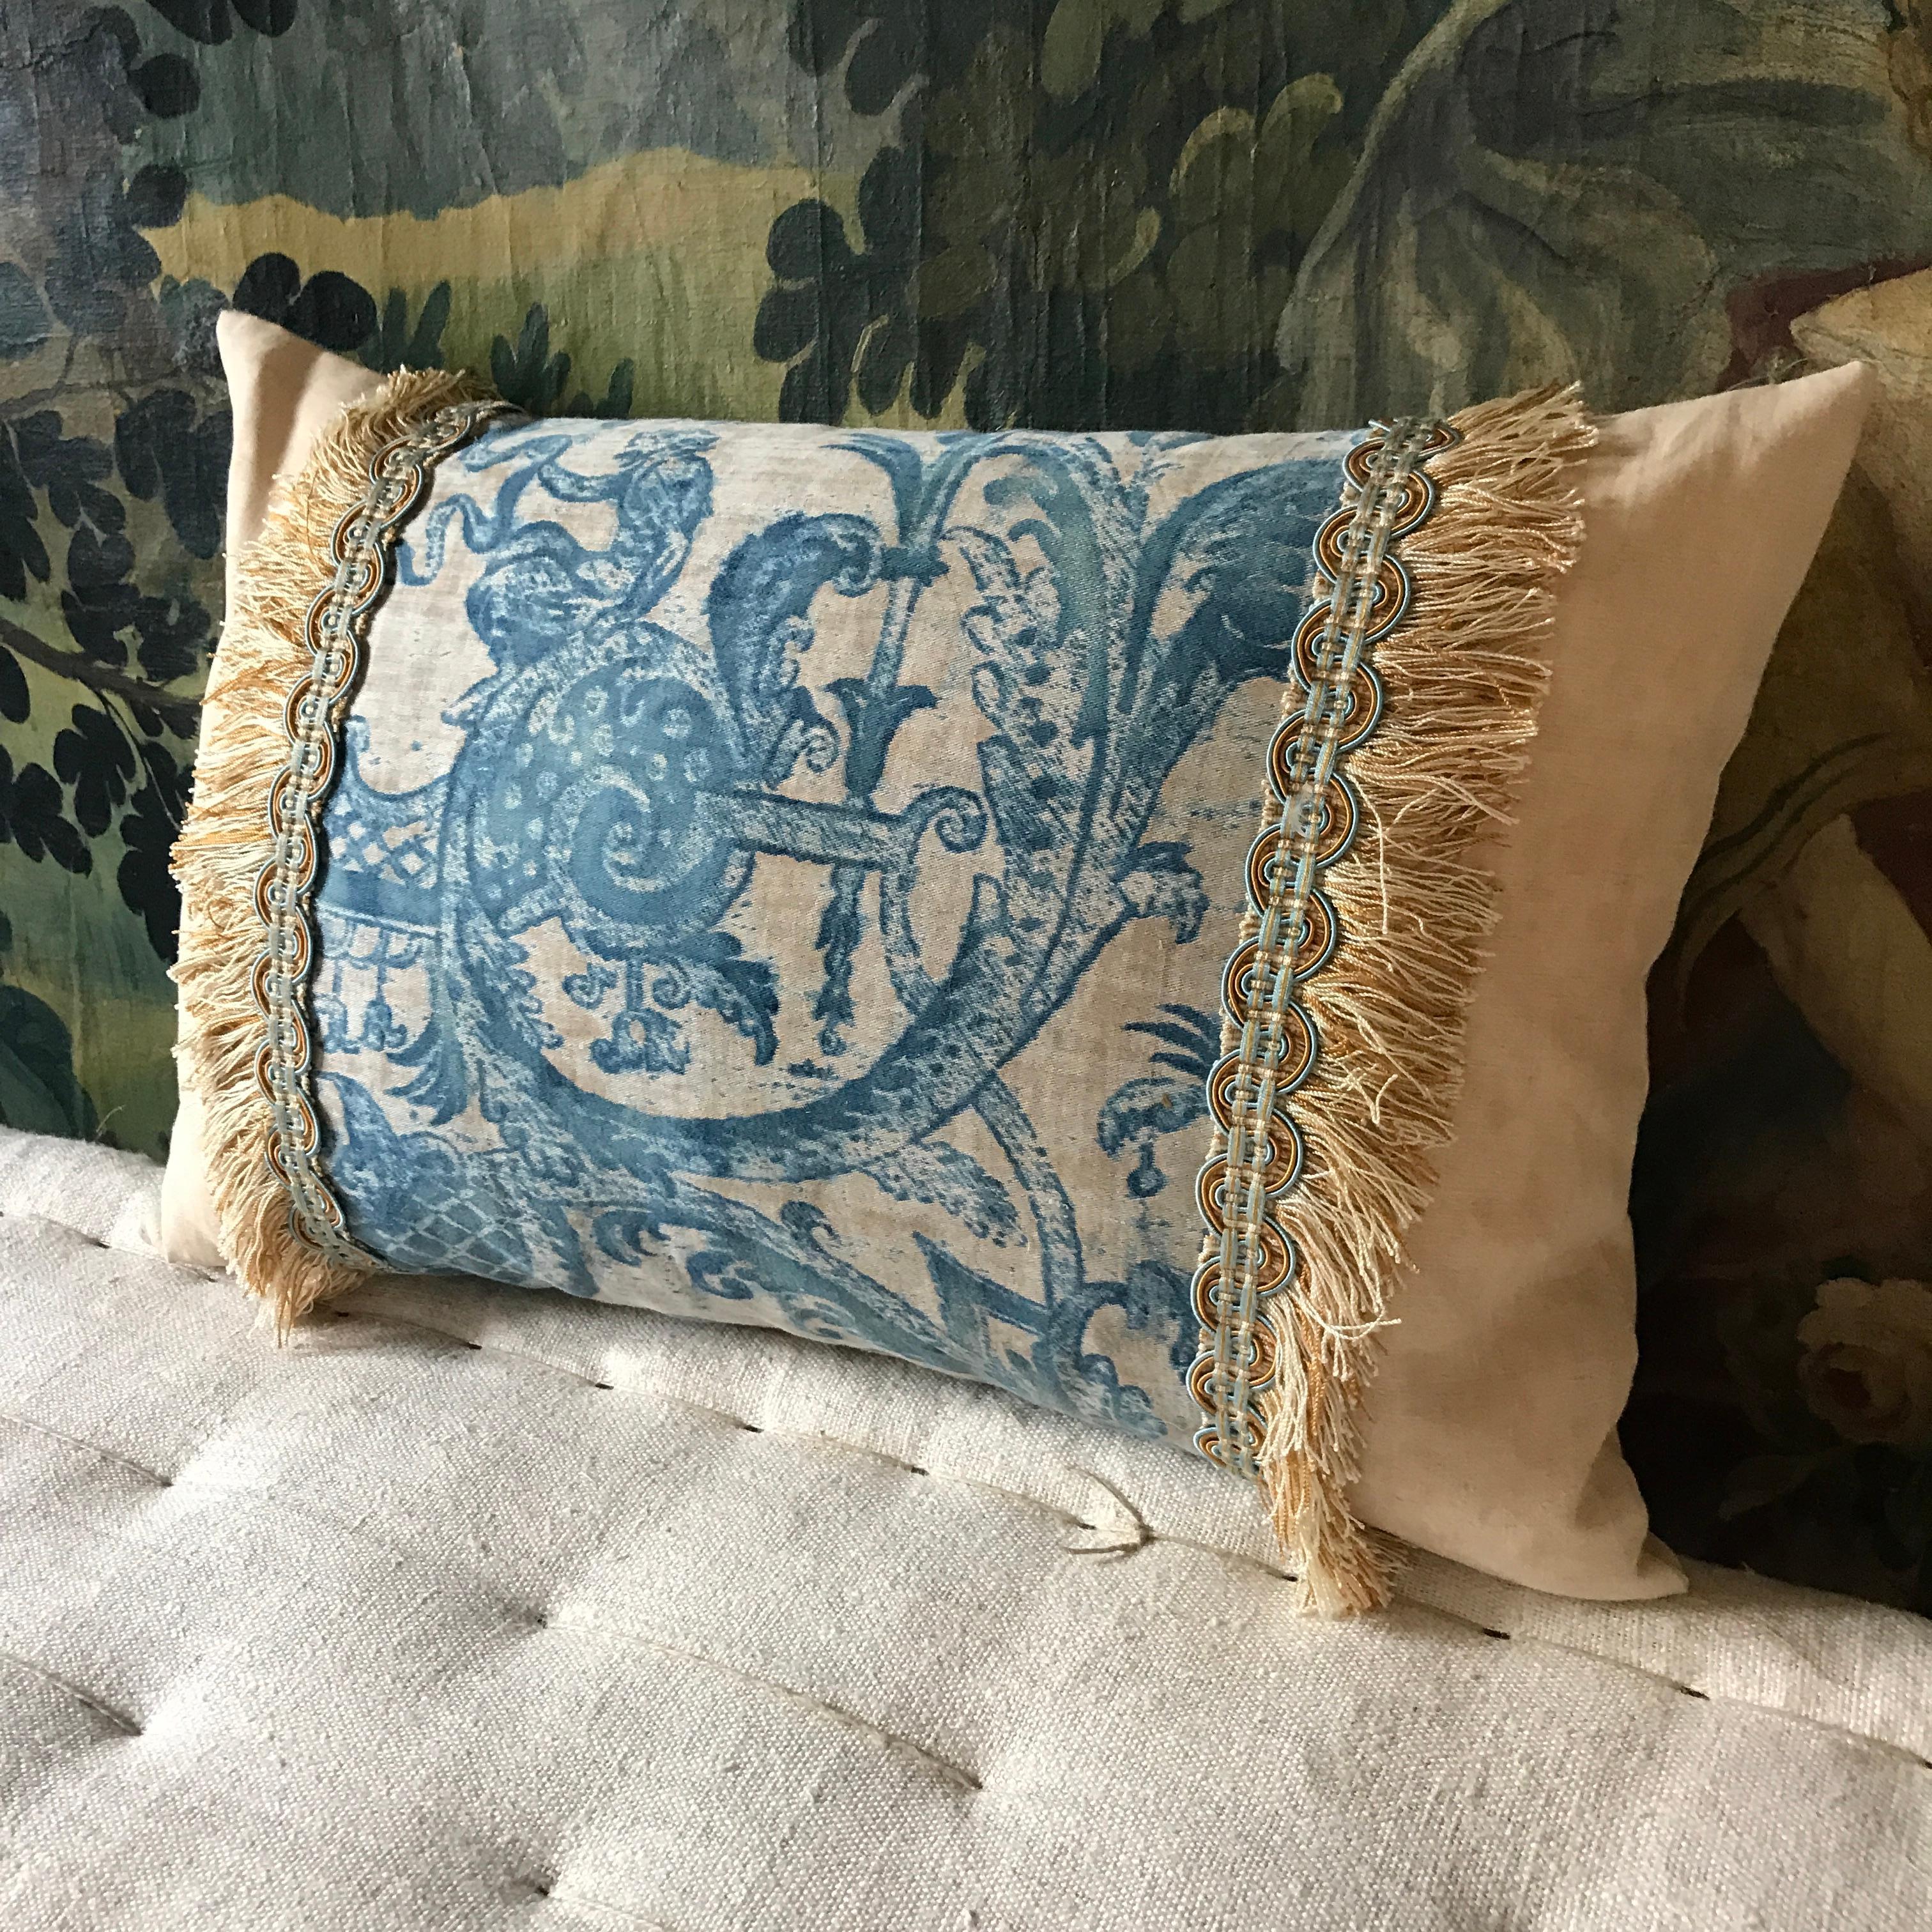 Hand-Crafted Fortuny Cushion 